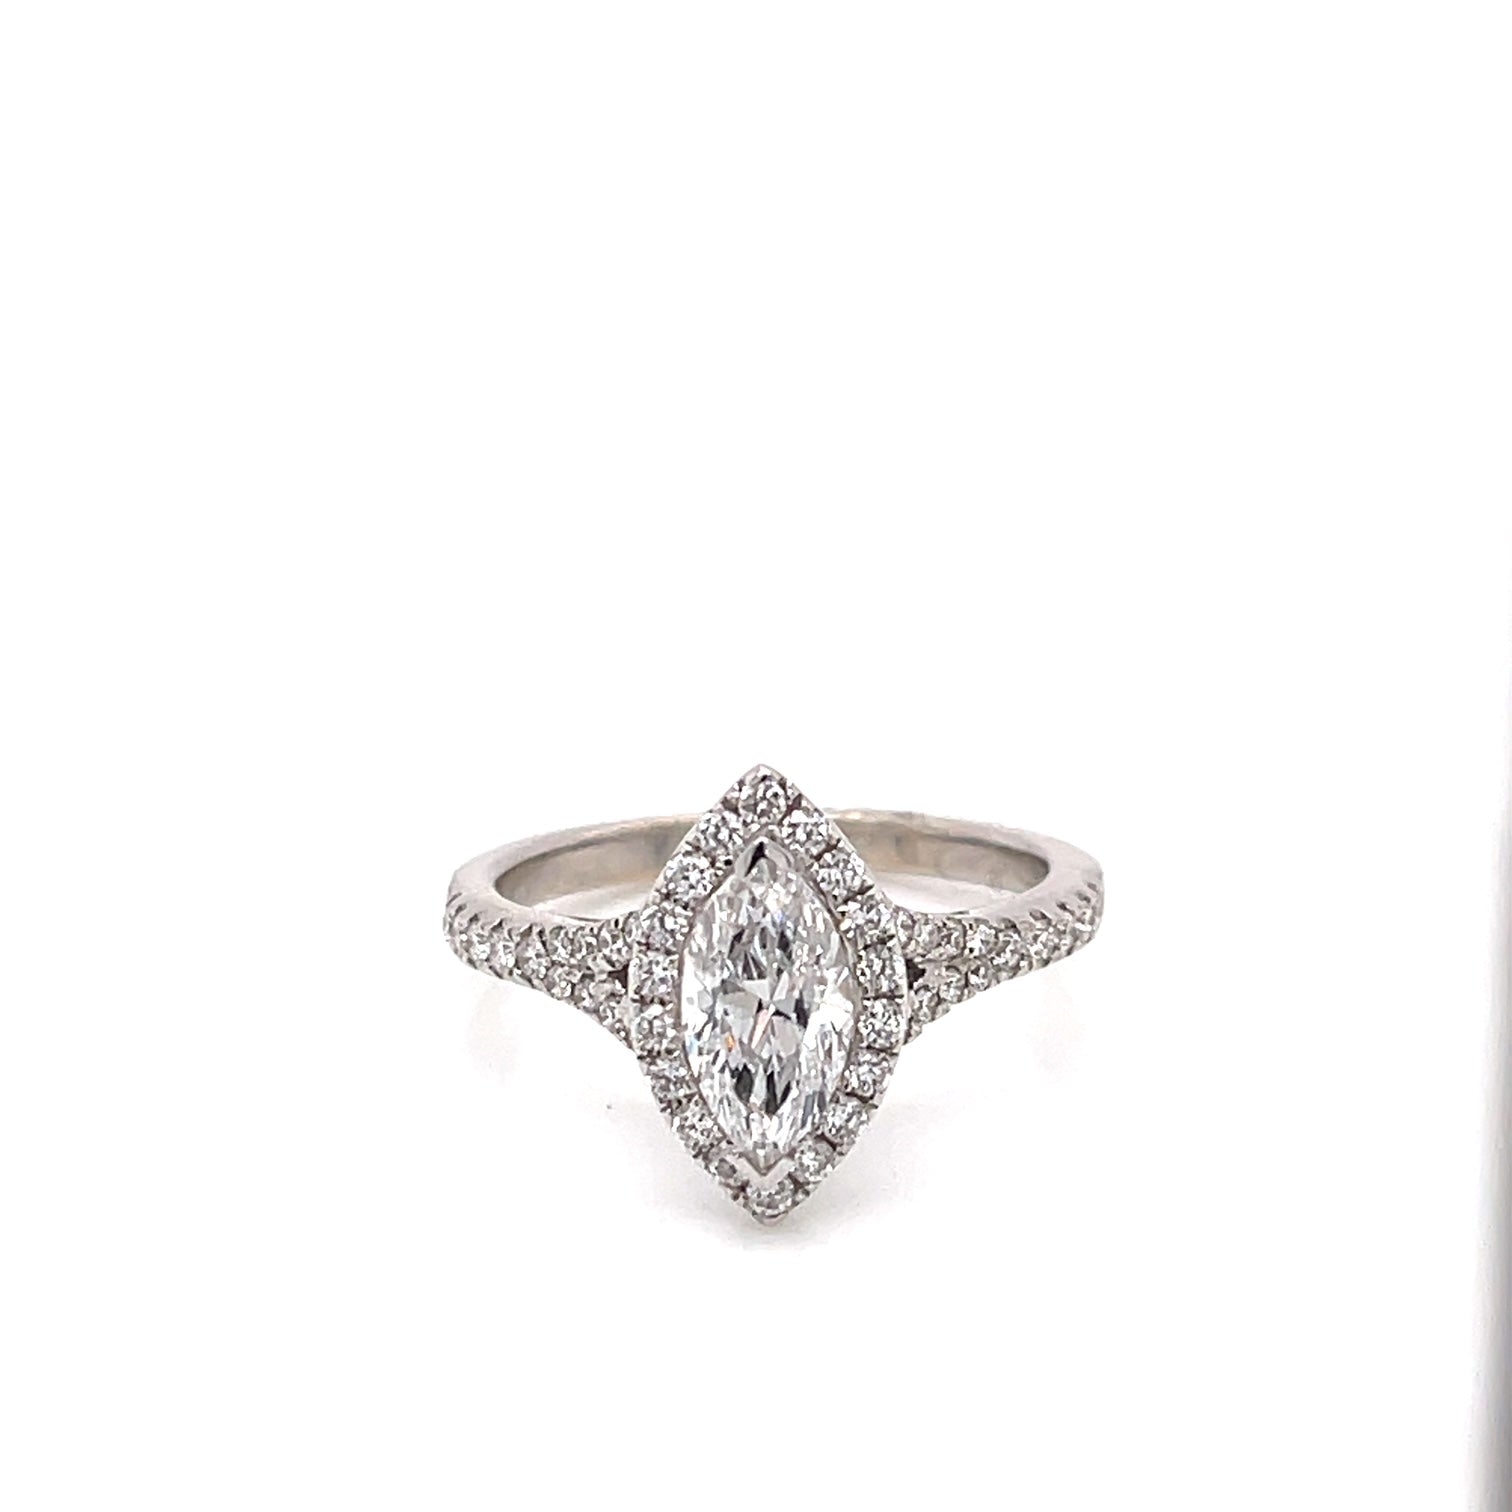 Diamonds may be a girl's best friend but we think this ring is perfect for your sweetheart.